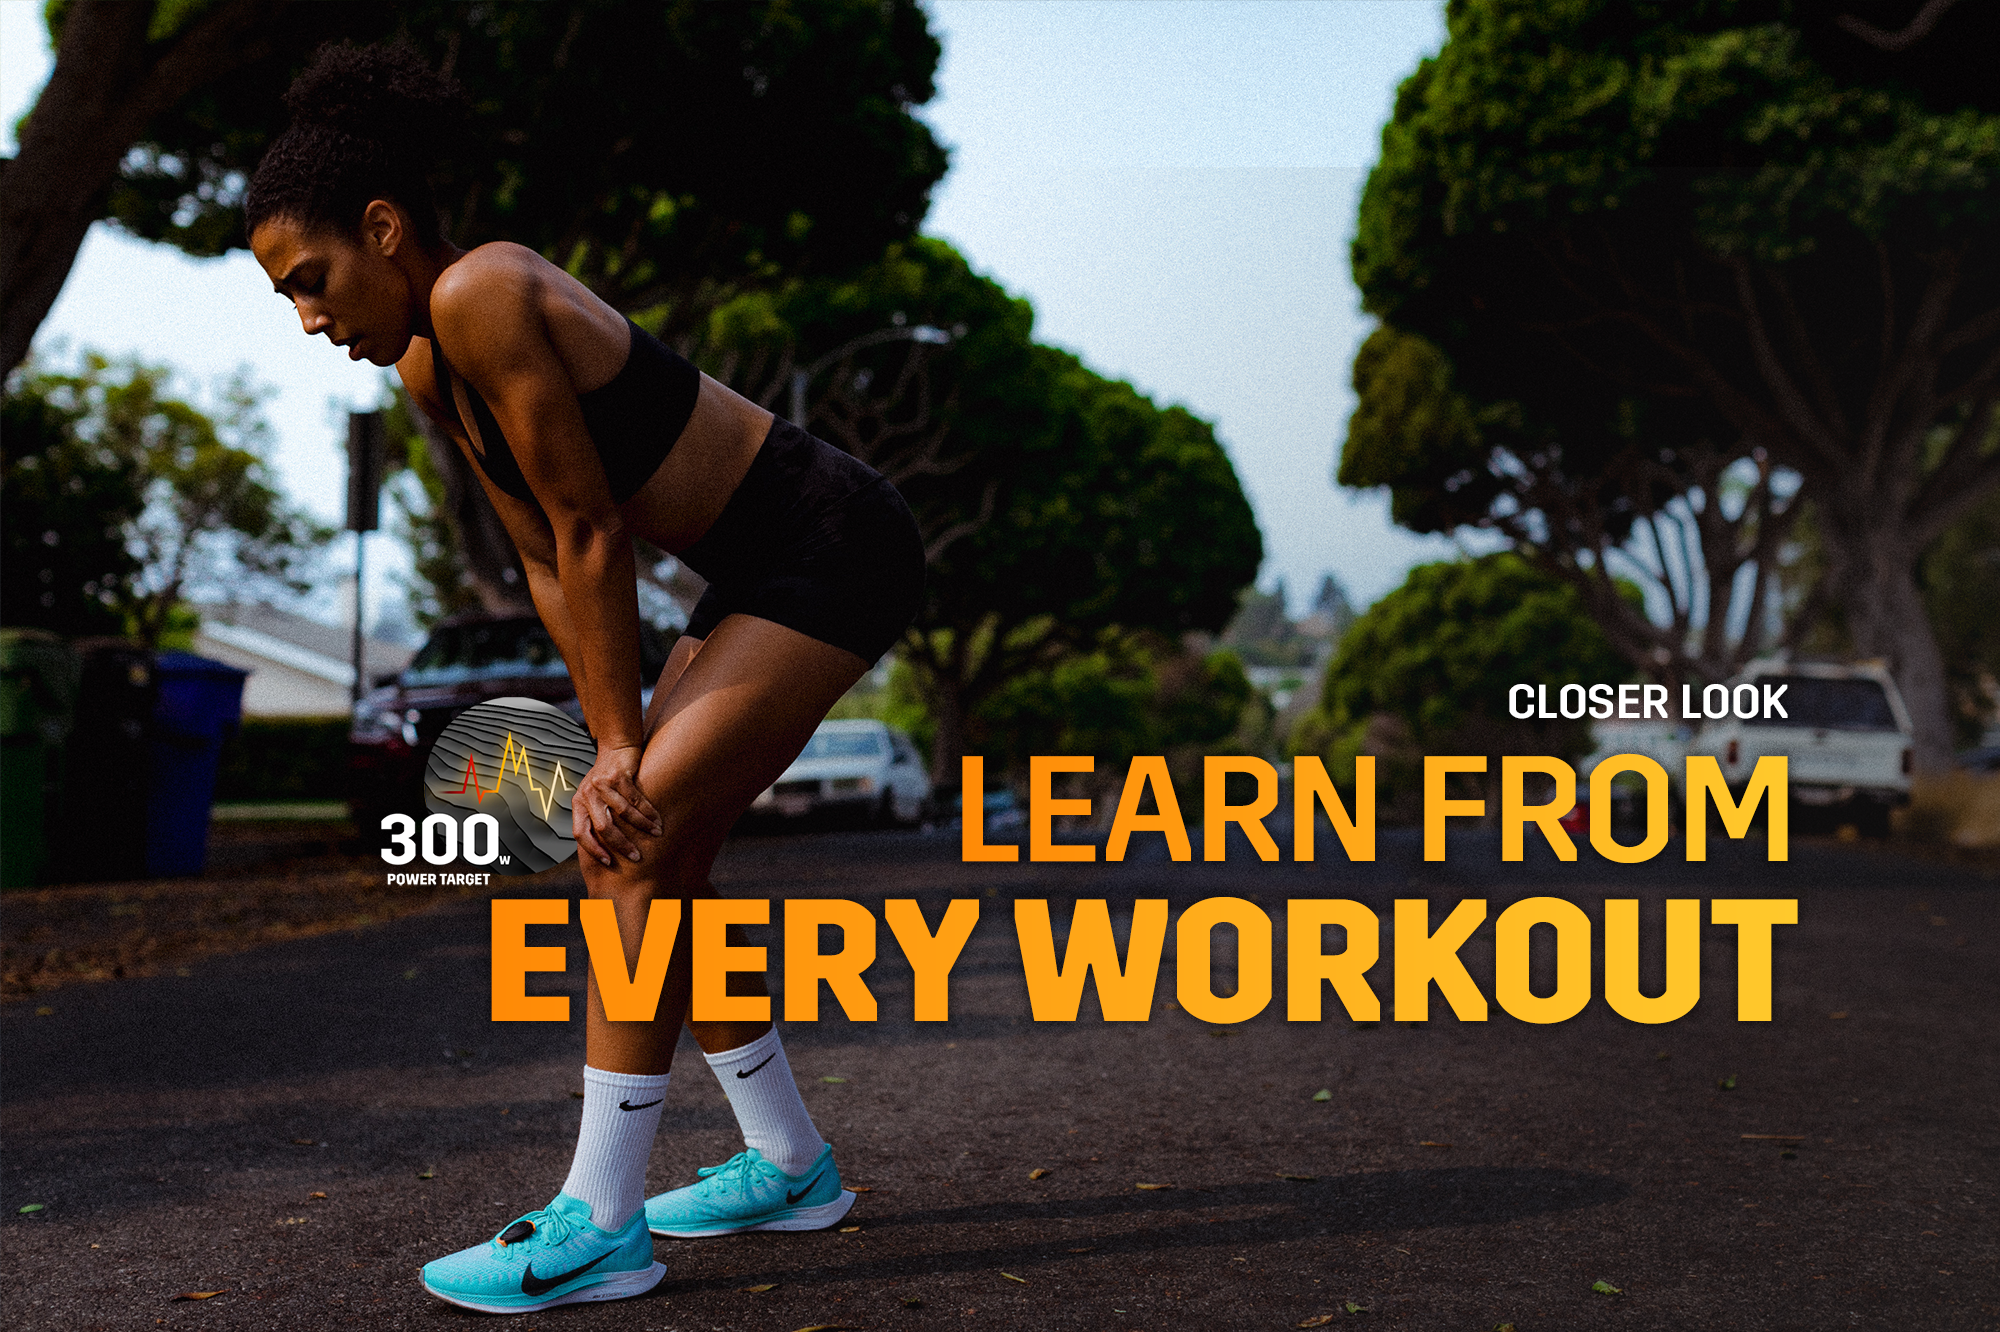 Closer Look: Learn from every workout with intelligent 'planned vs completed' breakdowns